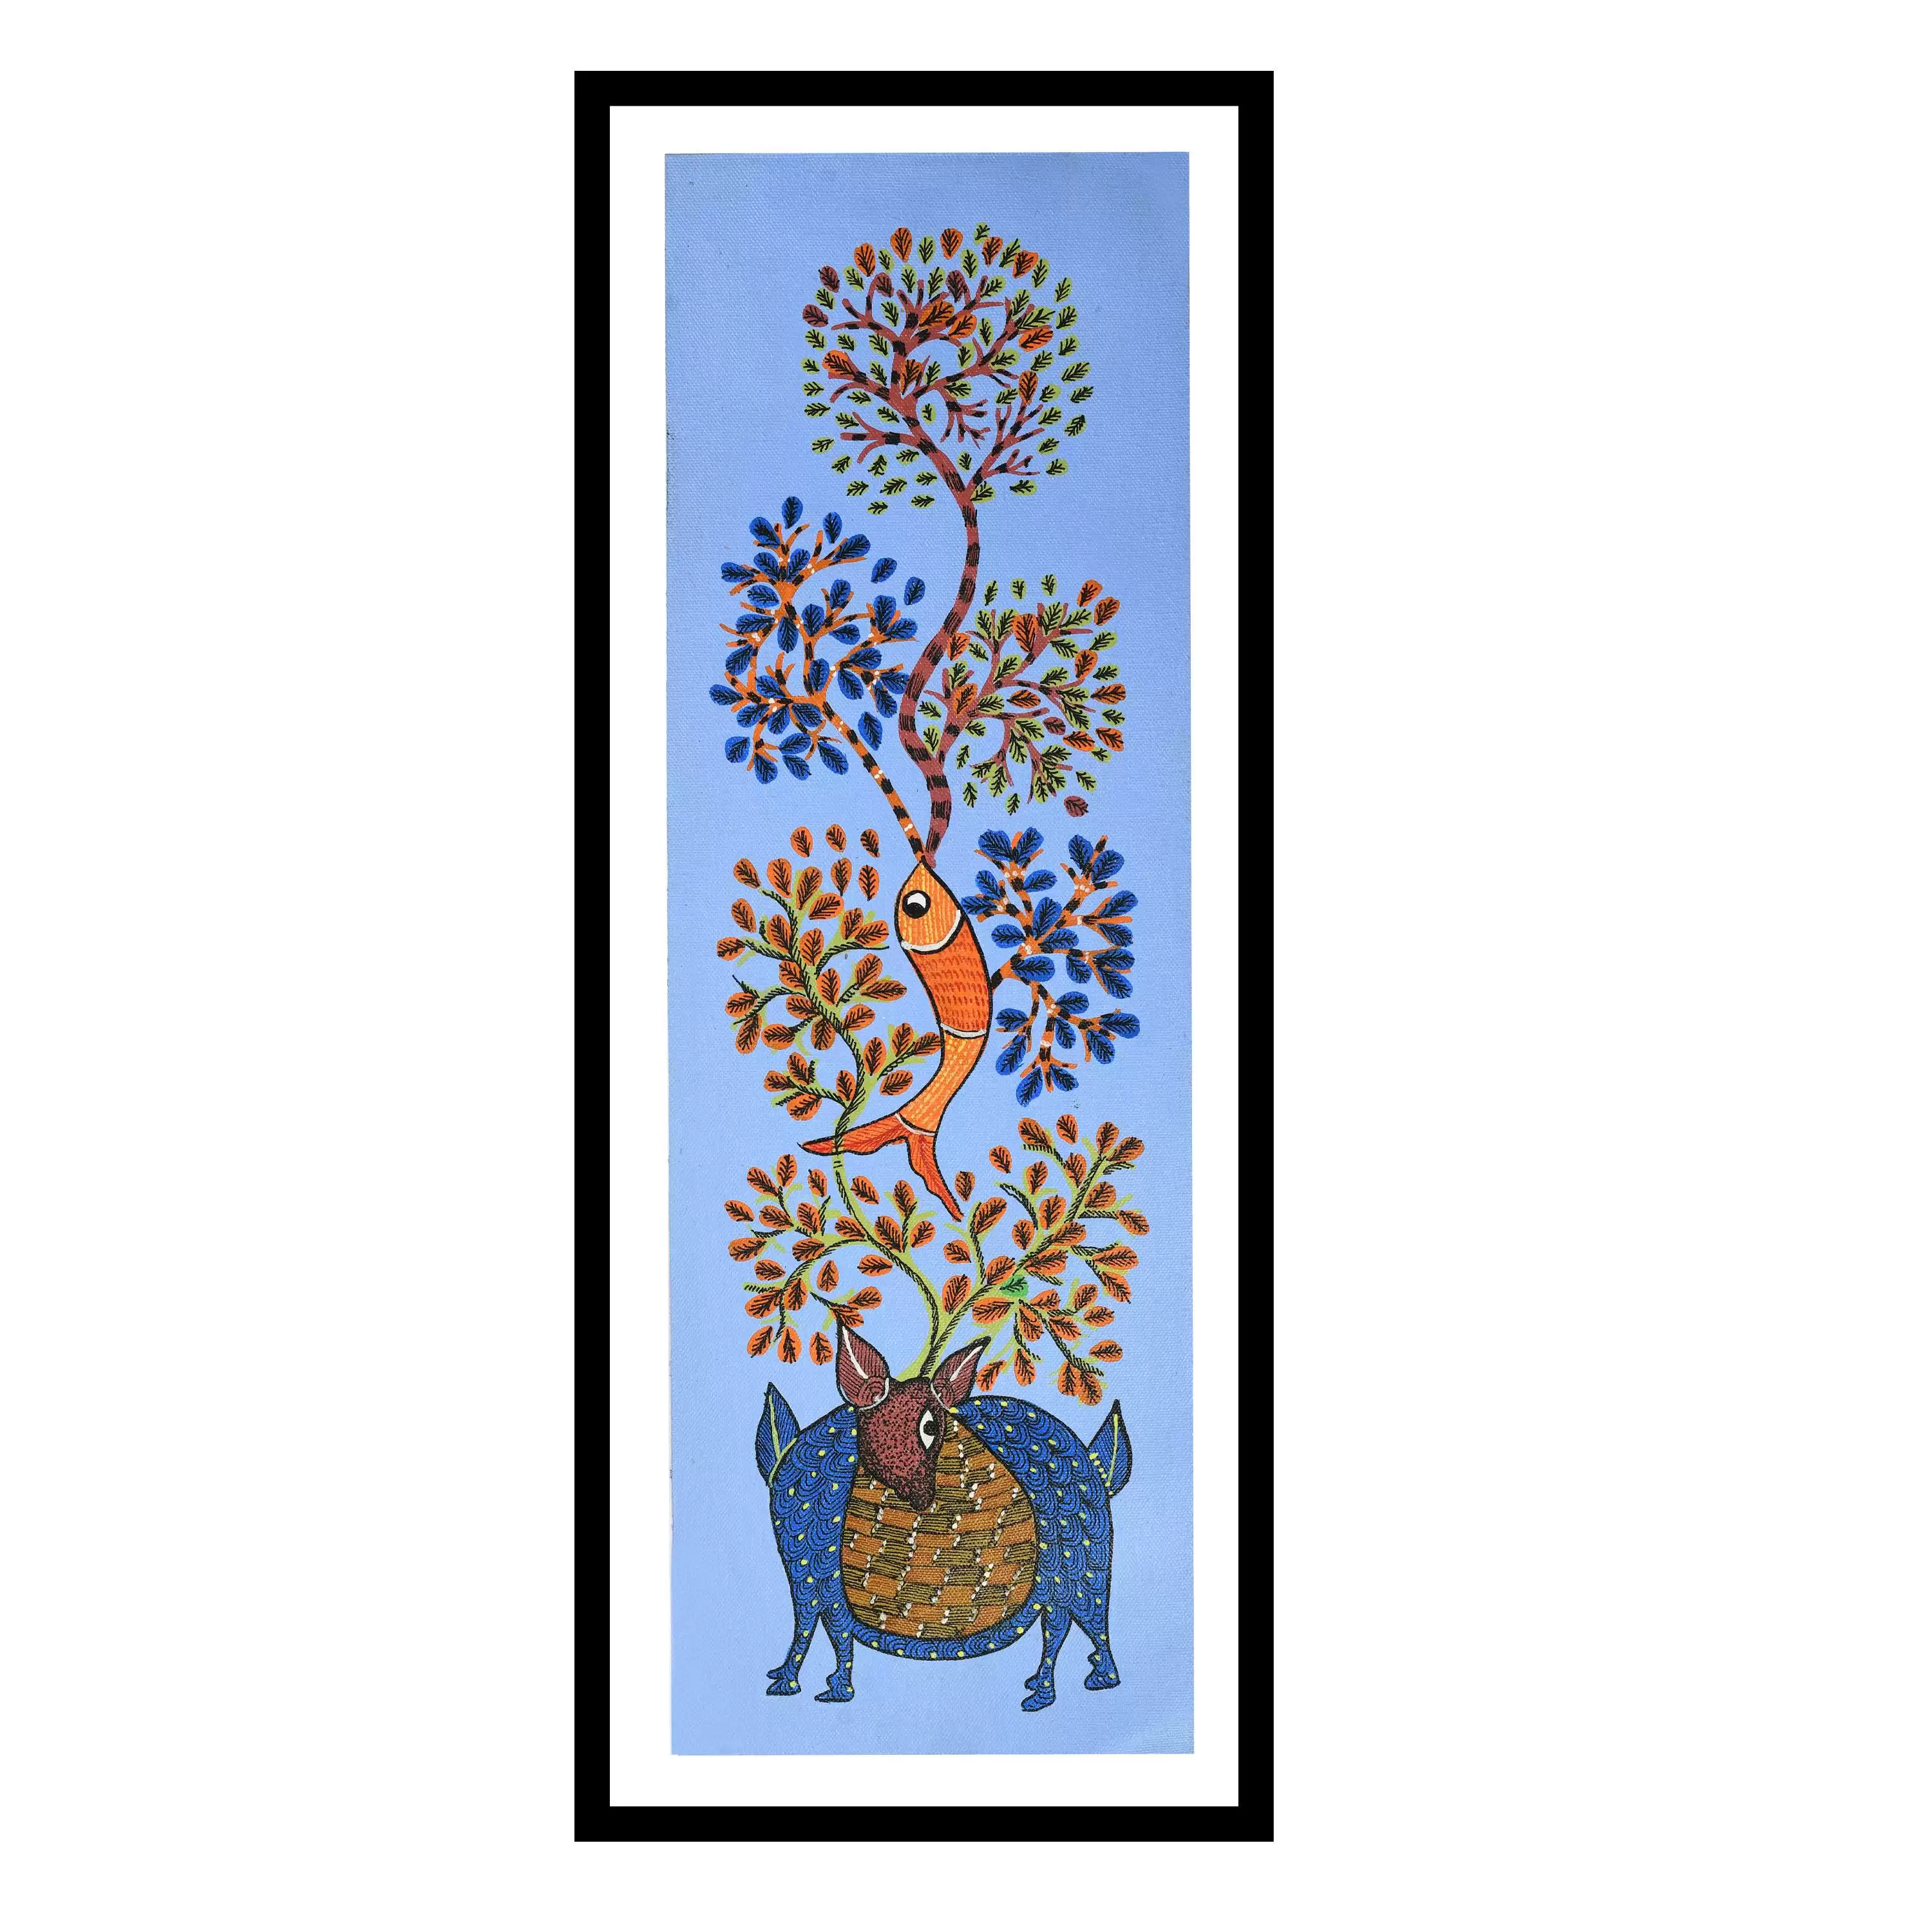 Deer, Fish & Tree Gond Art Painting for Home Wall Art Decor